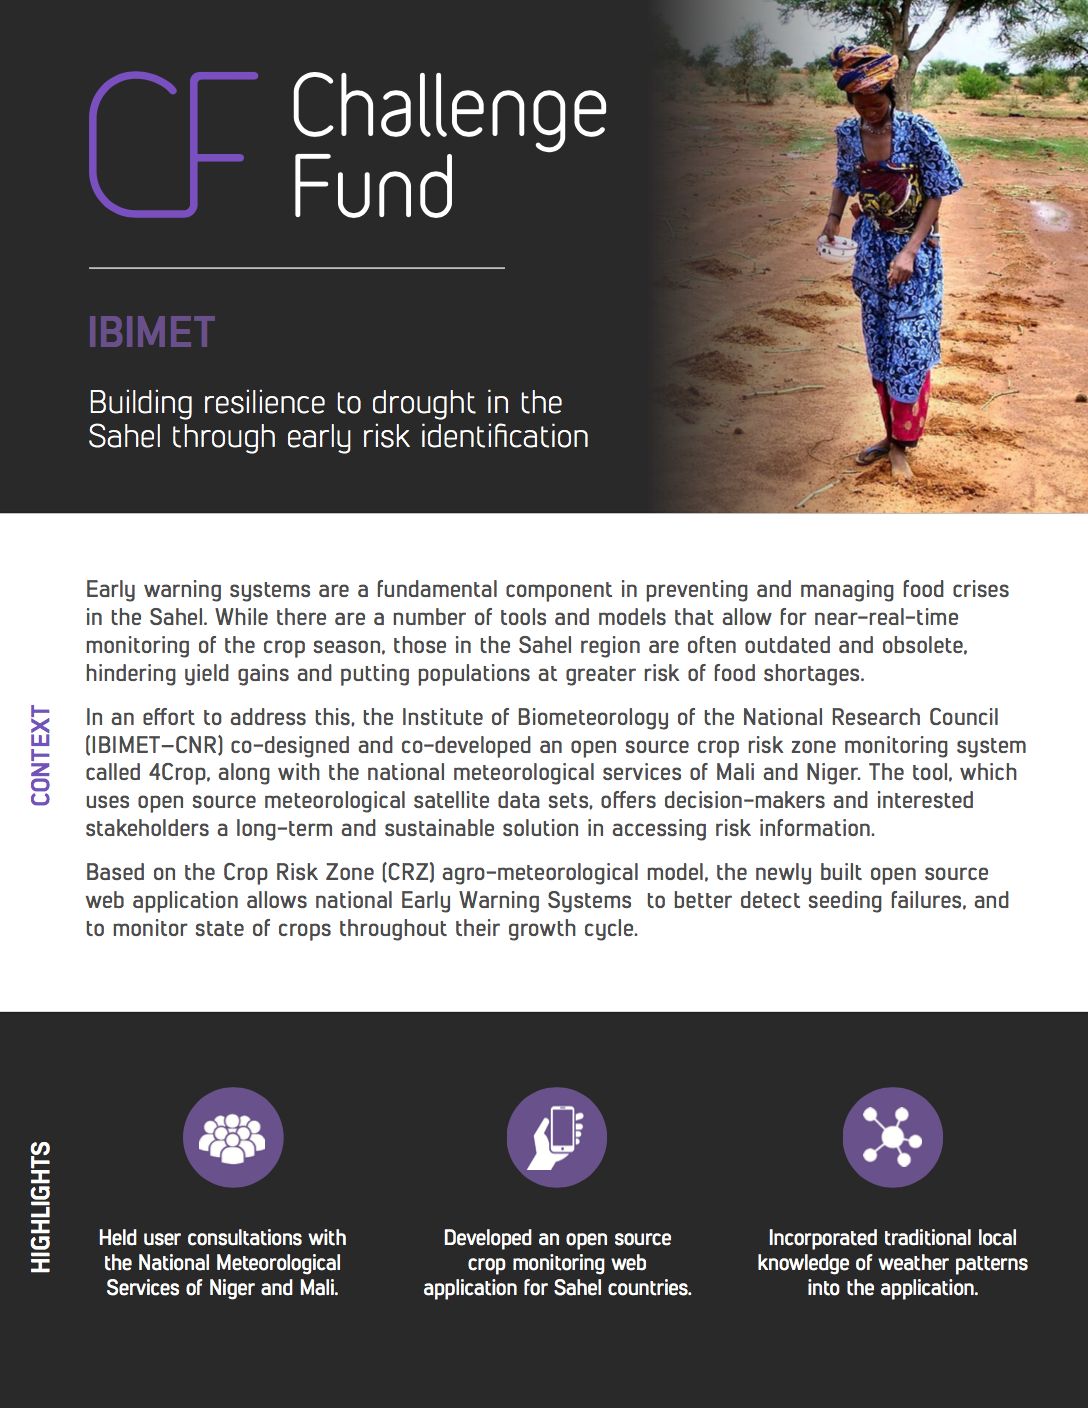 Building resilience to drought in the Sahel through early risk identification